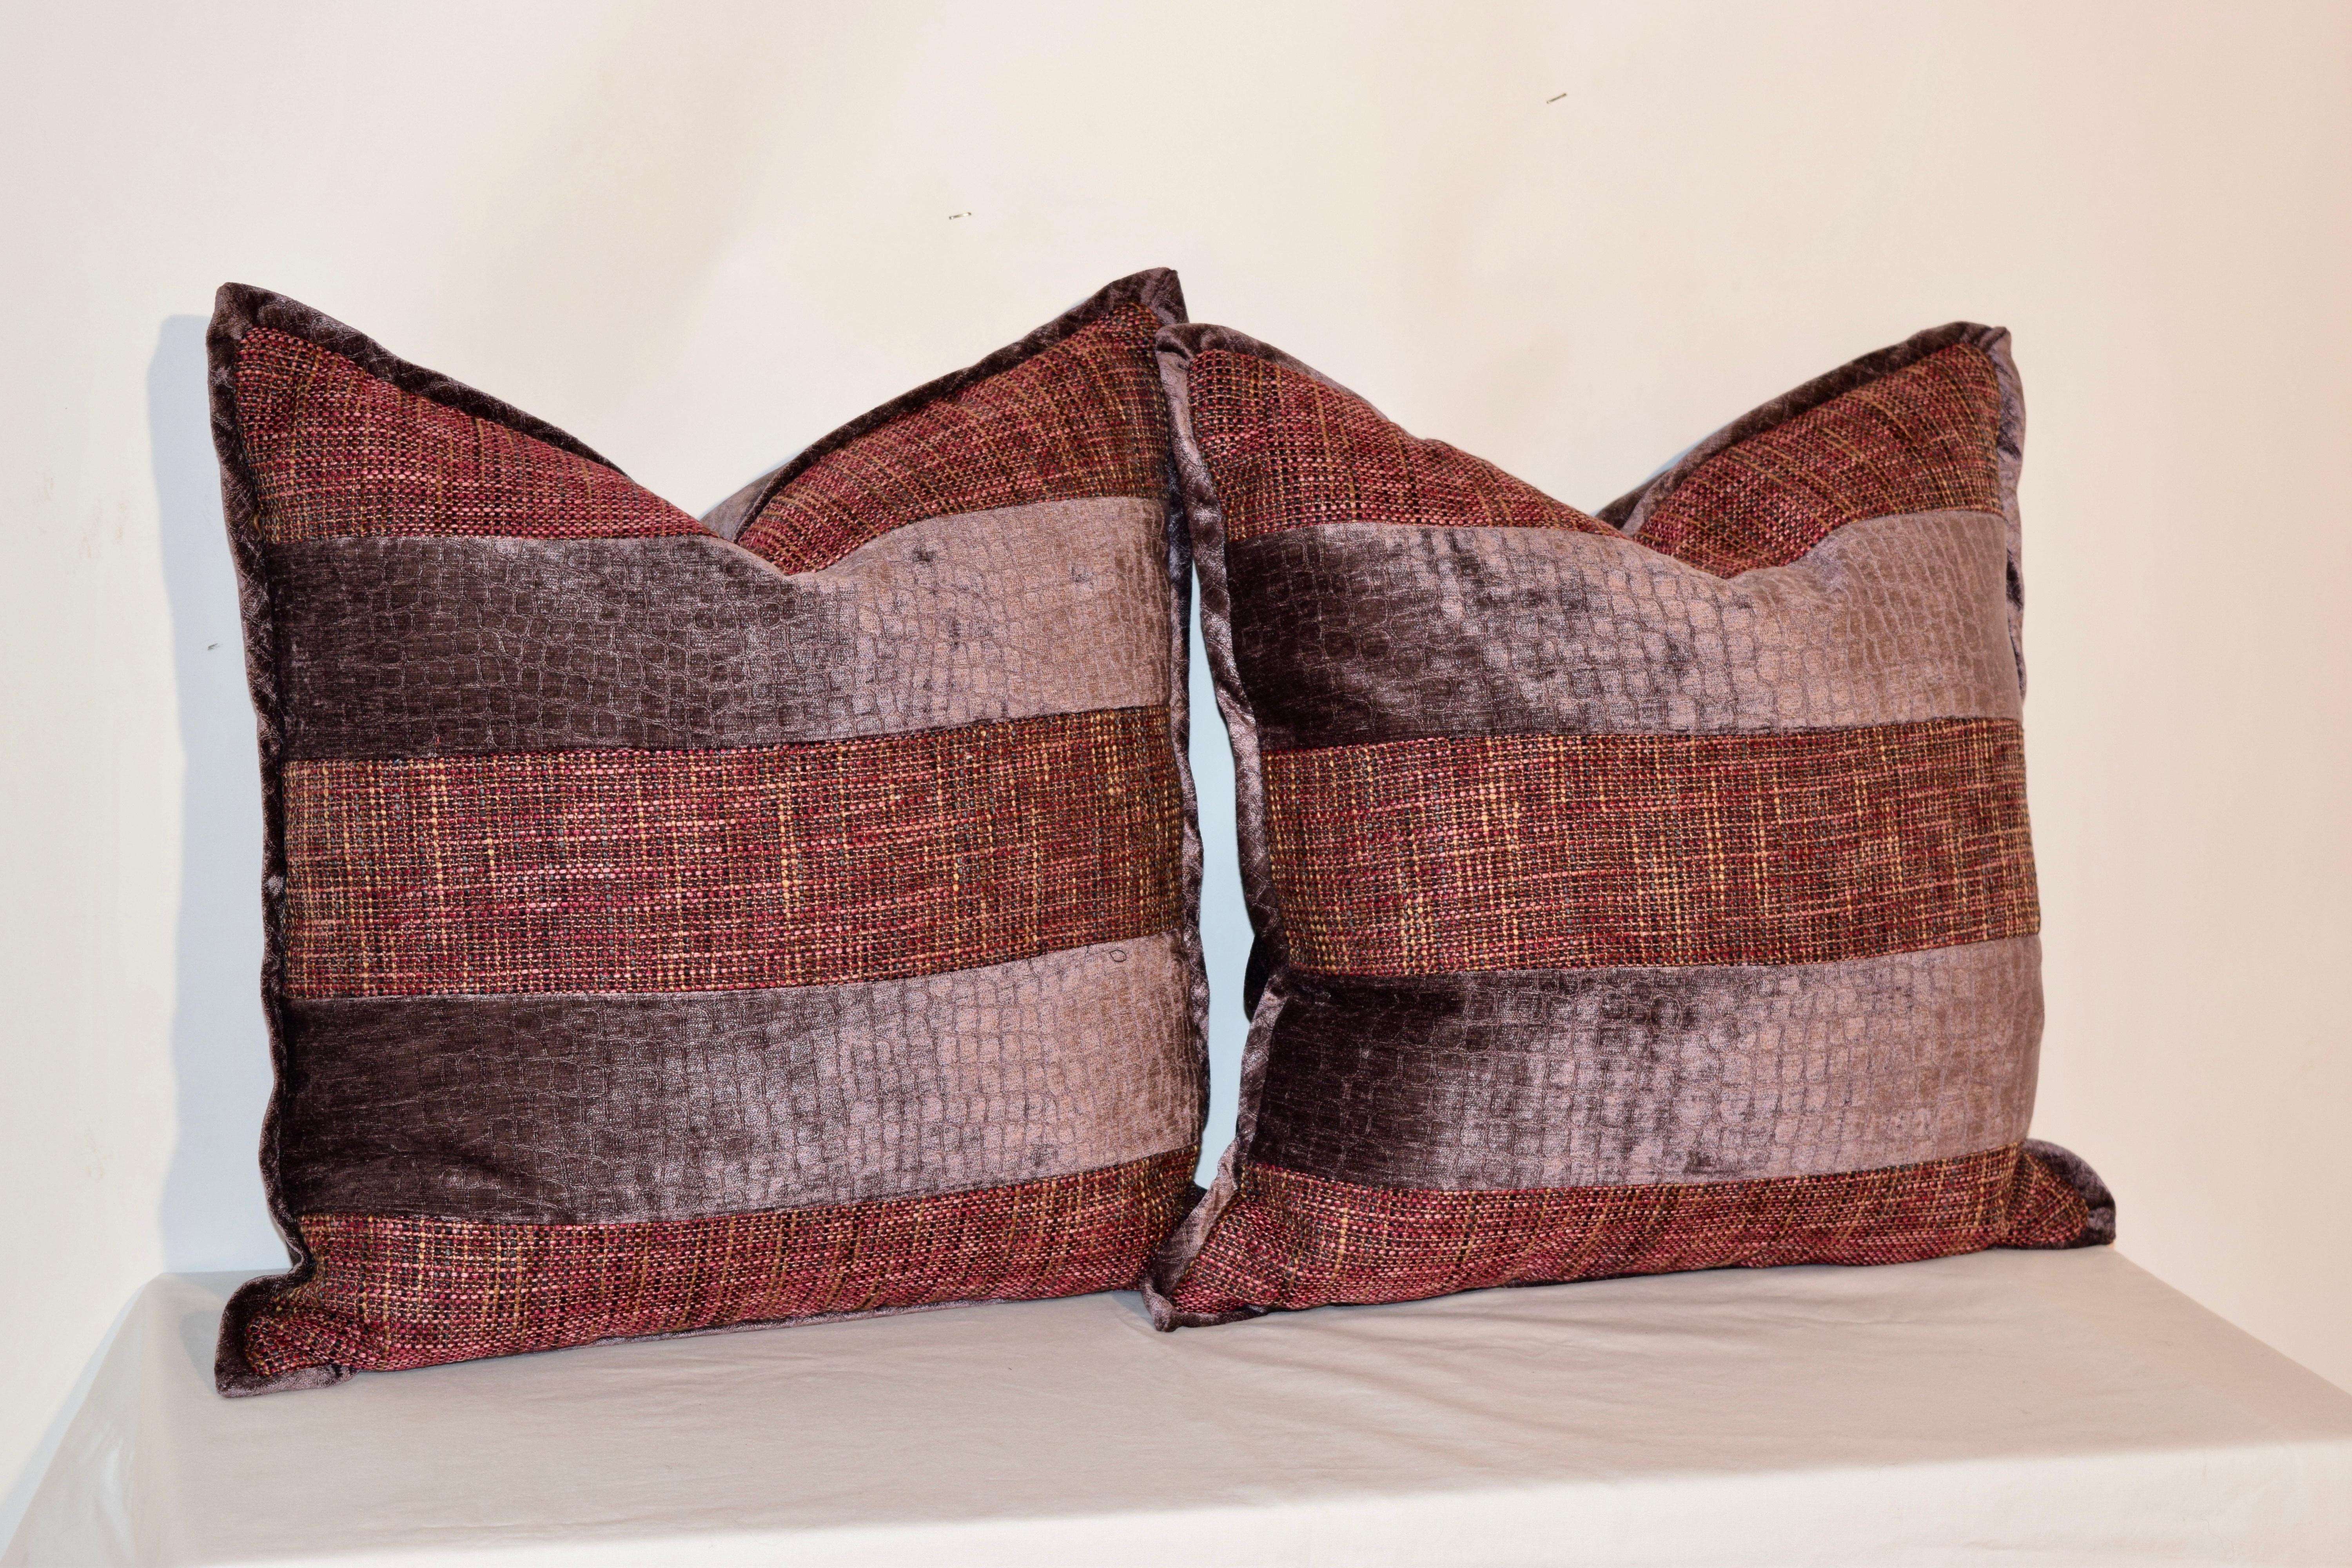 Handmade pillows made from dusty grape velvet and woven multicolored fabrics with a contrasting velvet welt. The covers have hidden zippers and the inserts are removable. Dry clean only.